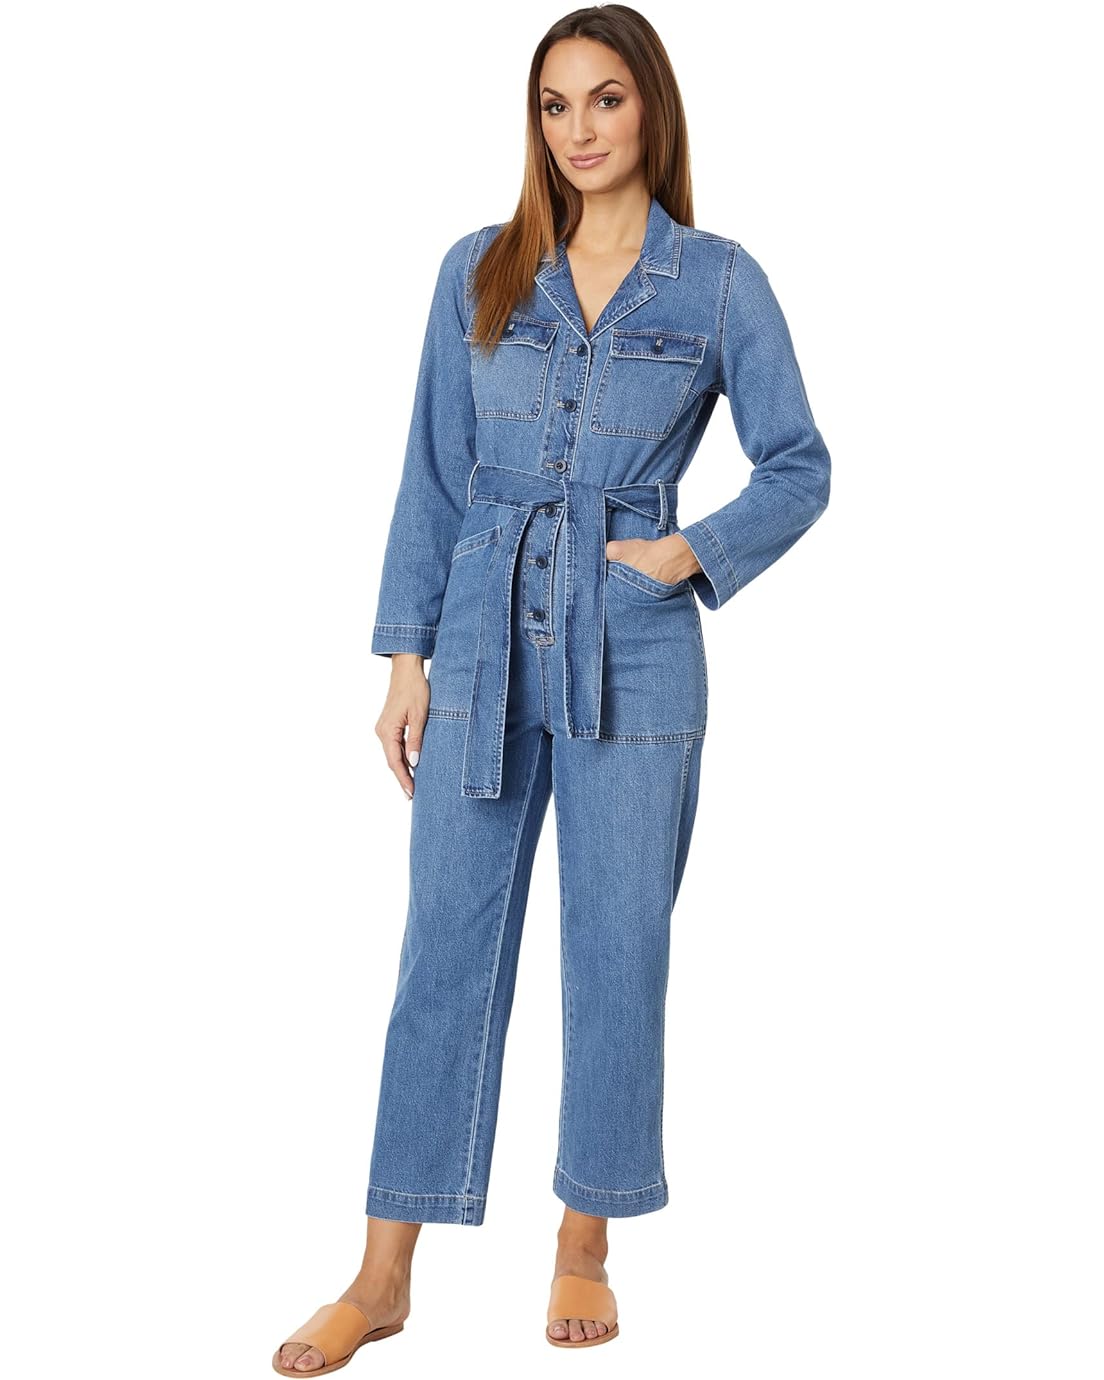 Madewell Long Sleeve Tie-Waist Coverall in Claireville Wash